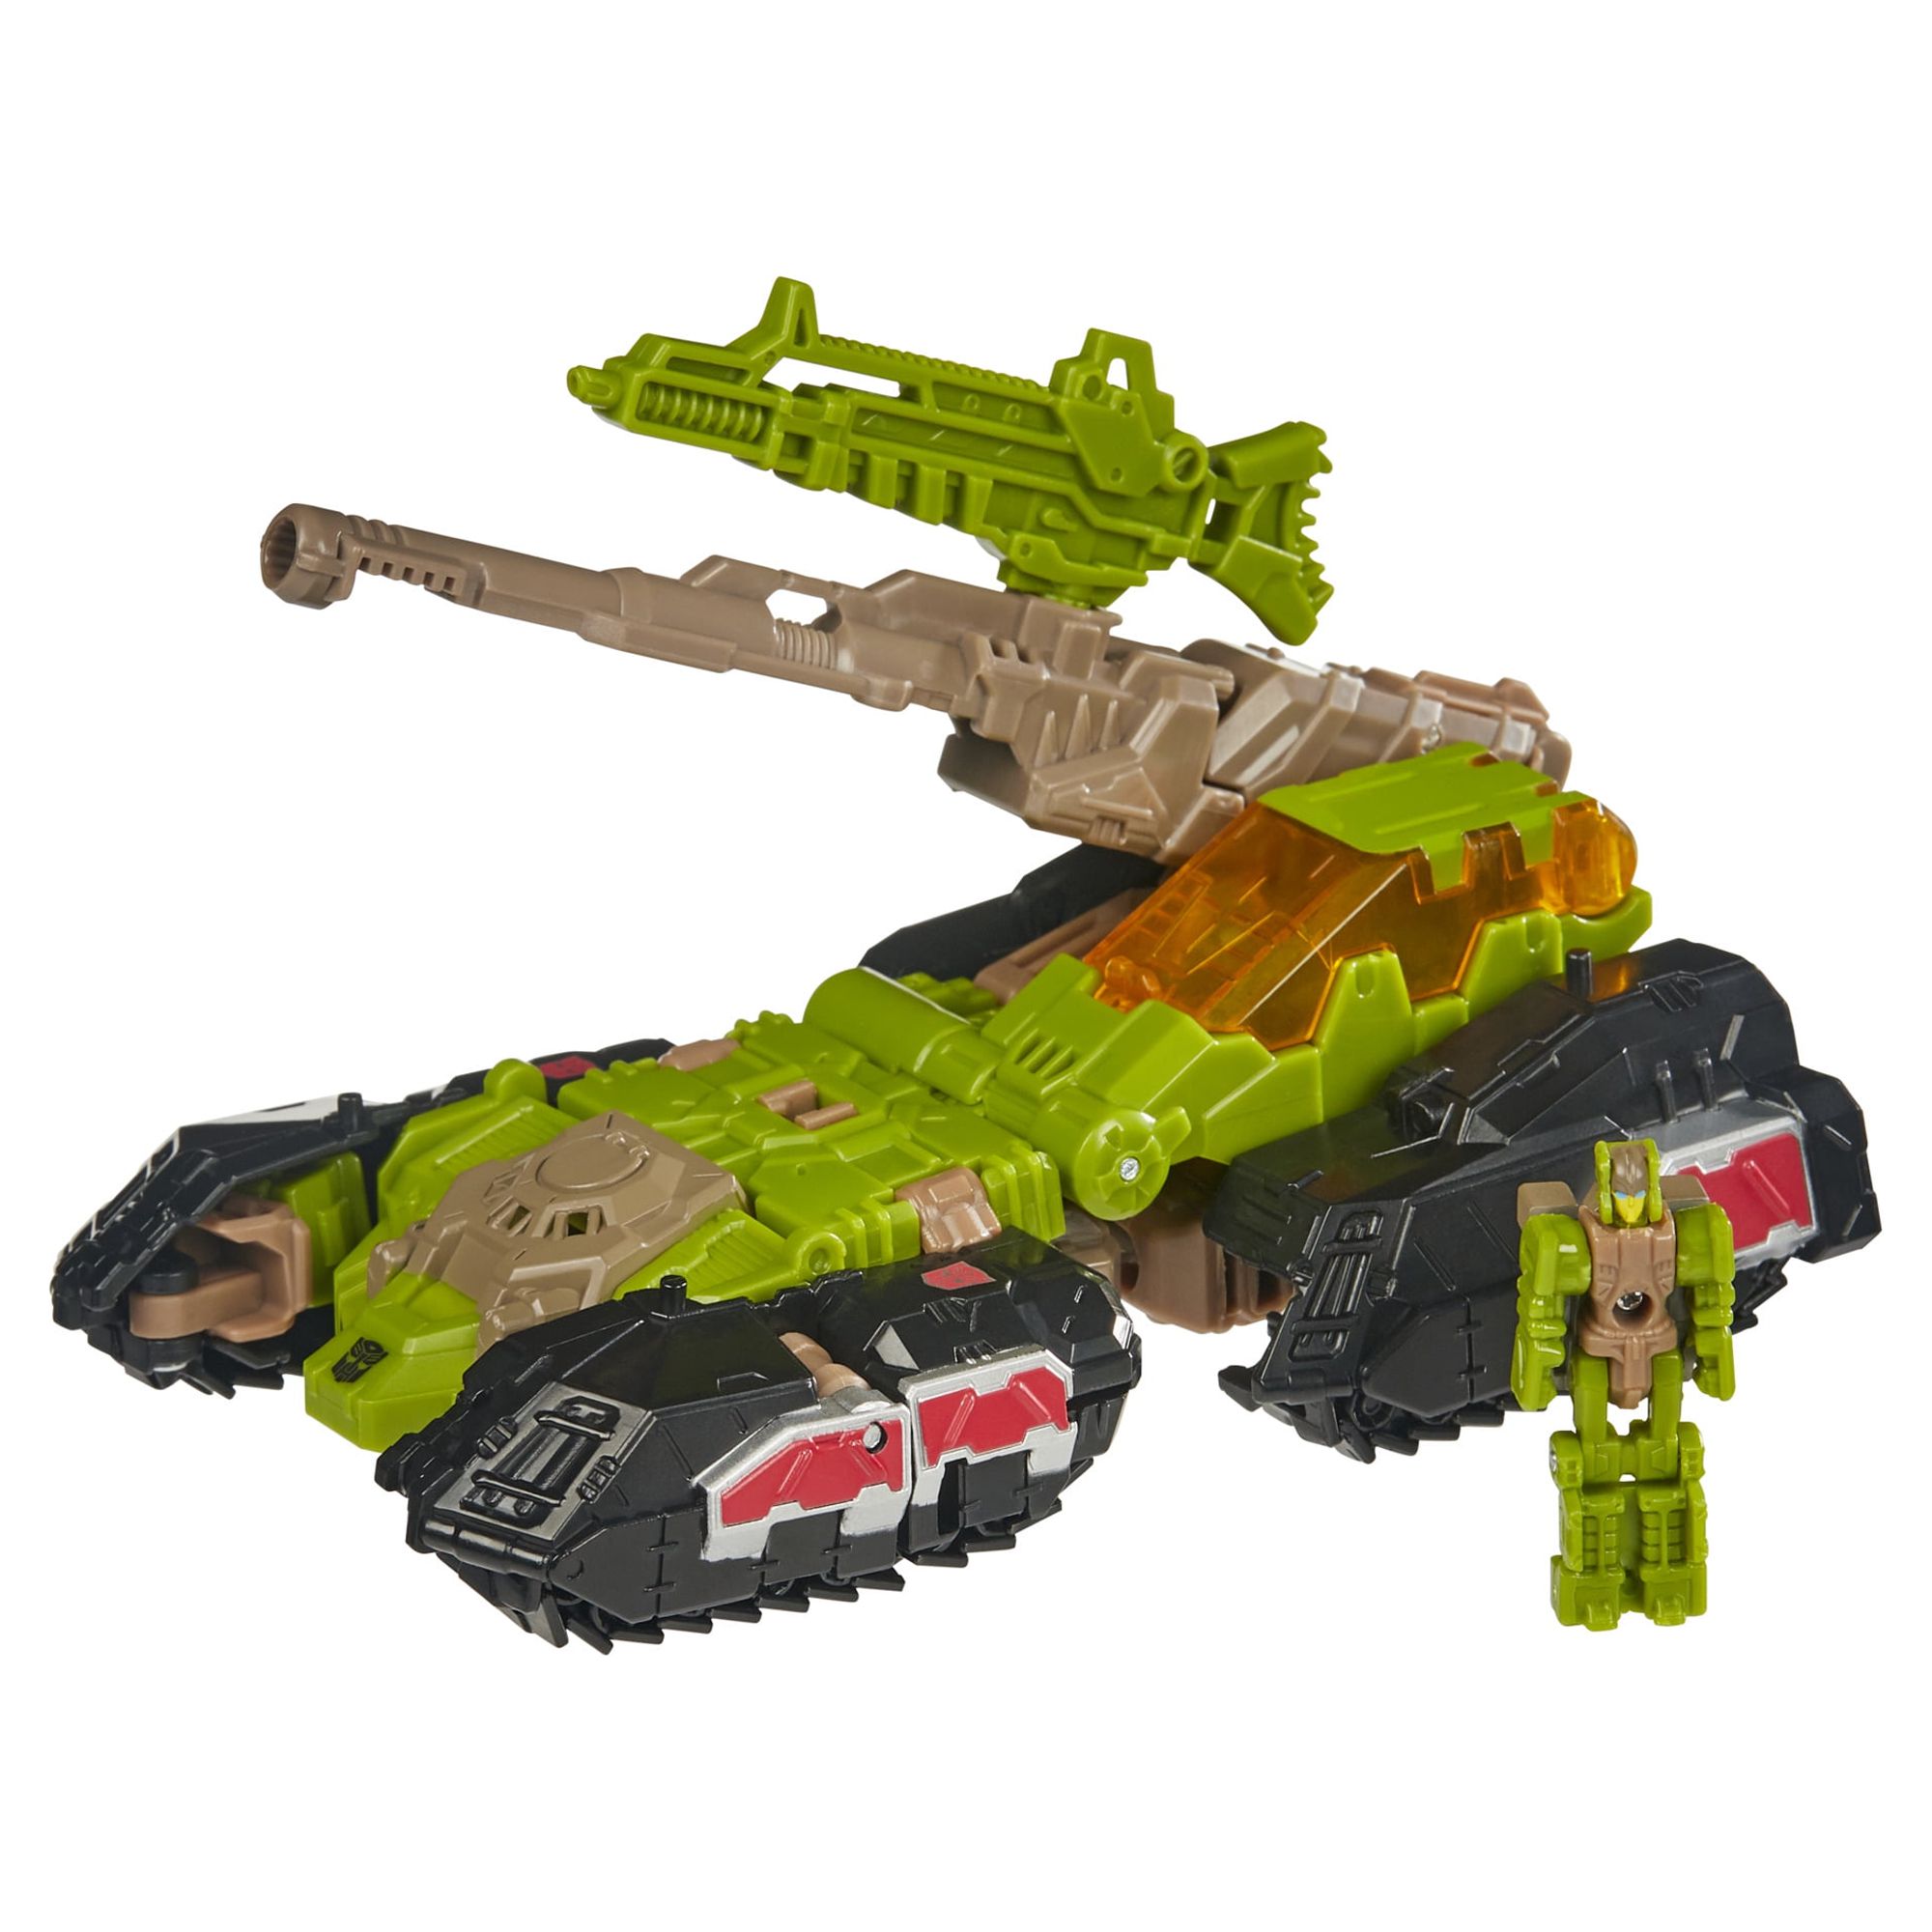 Transformers: Headmaster Hardhead Kids Toy Action Figure for Boys and Girls (3”) - image 4 of 8